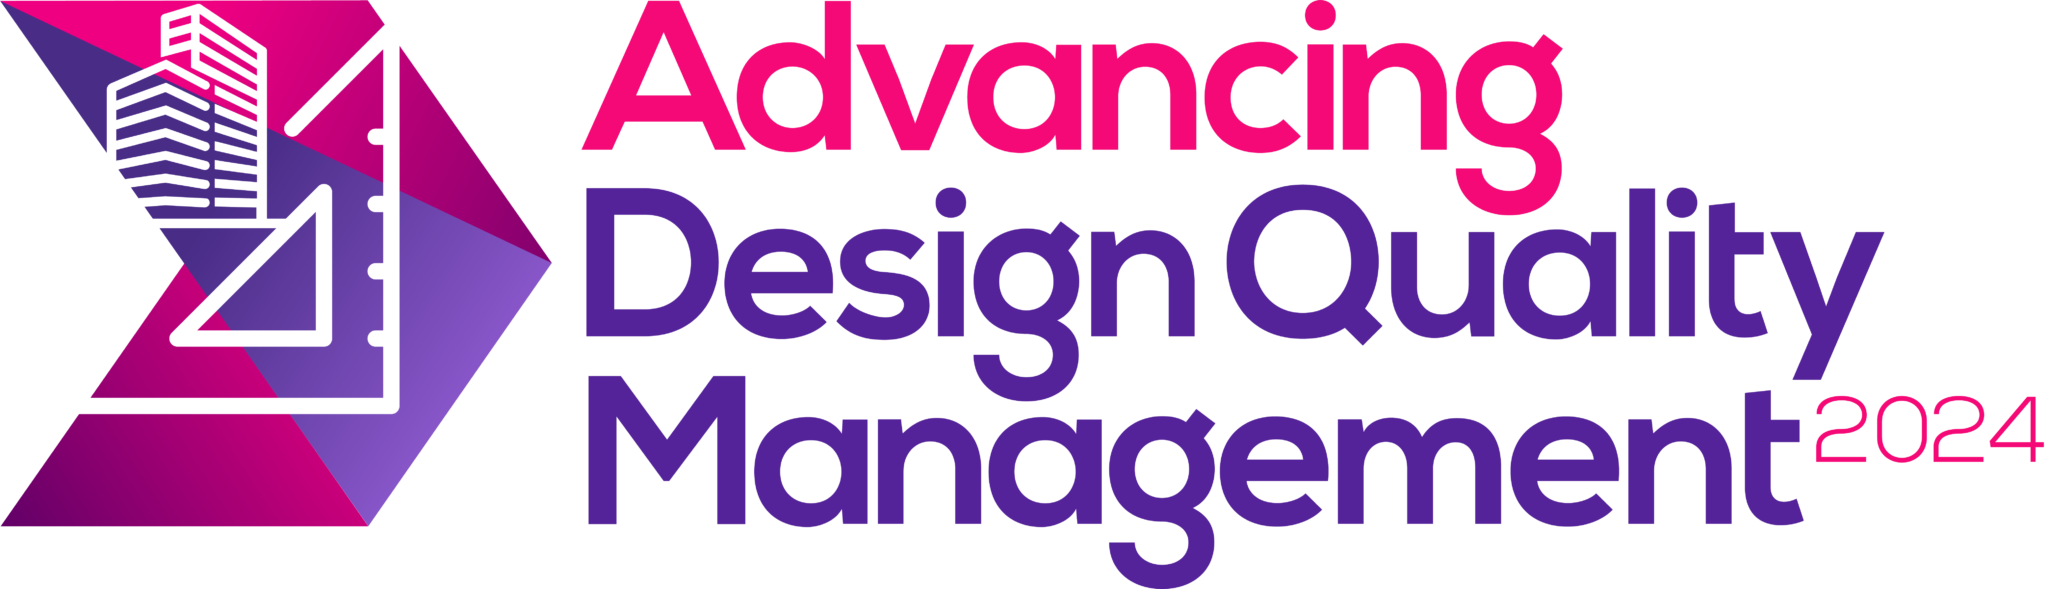 Advancing Design Quality Management 2024 May 13